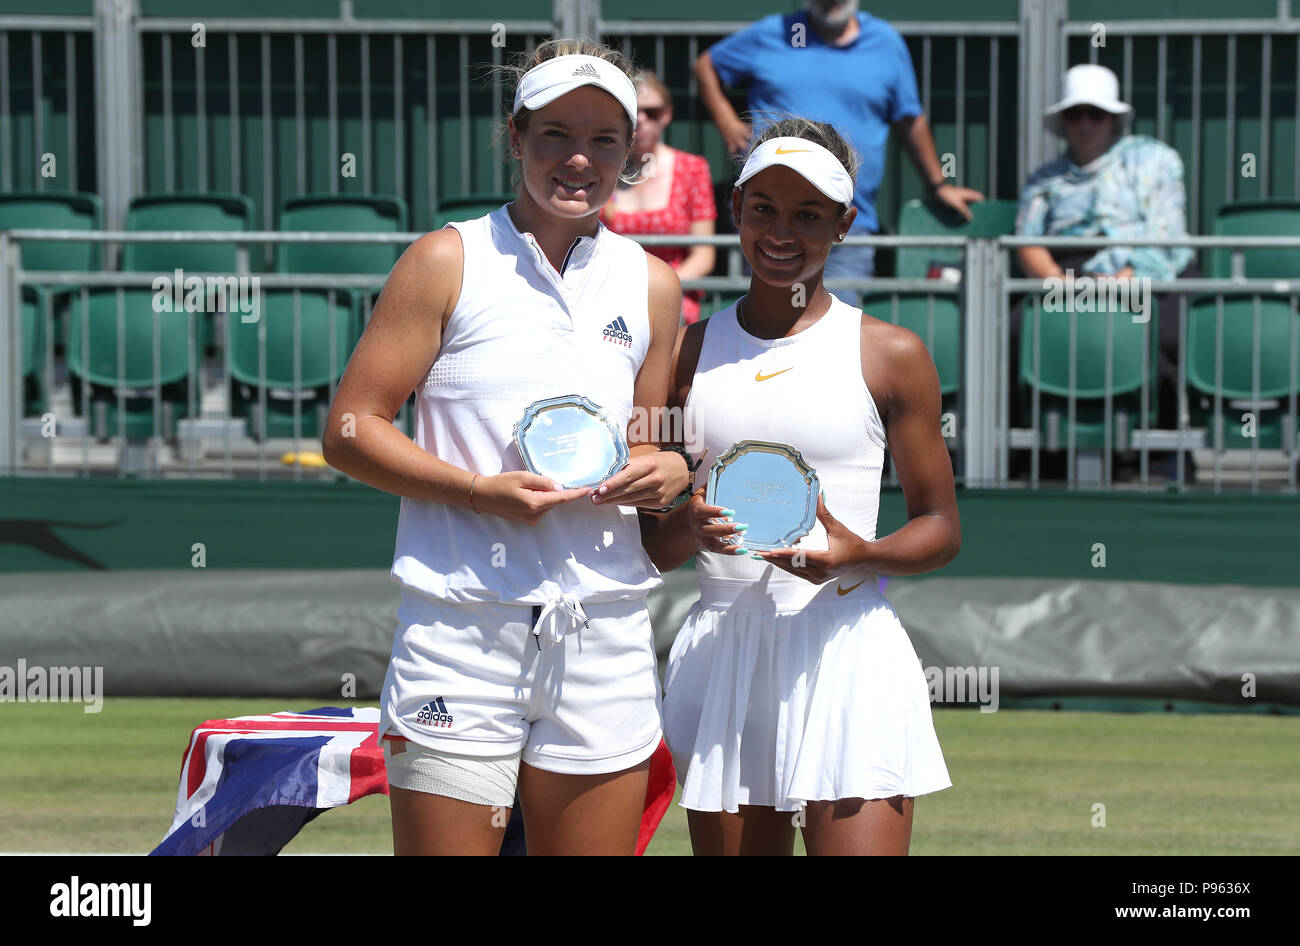 Caty Mcnally (left) and Whitney Osuigwe (right) with the runners up trophy in the Girls Doubles Final on day thirteen of the Wimbledon Championships at the All England Lawn Tennis and Croquet